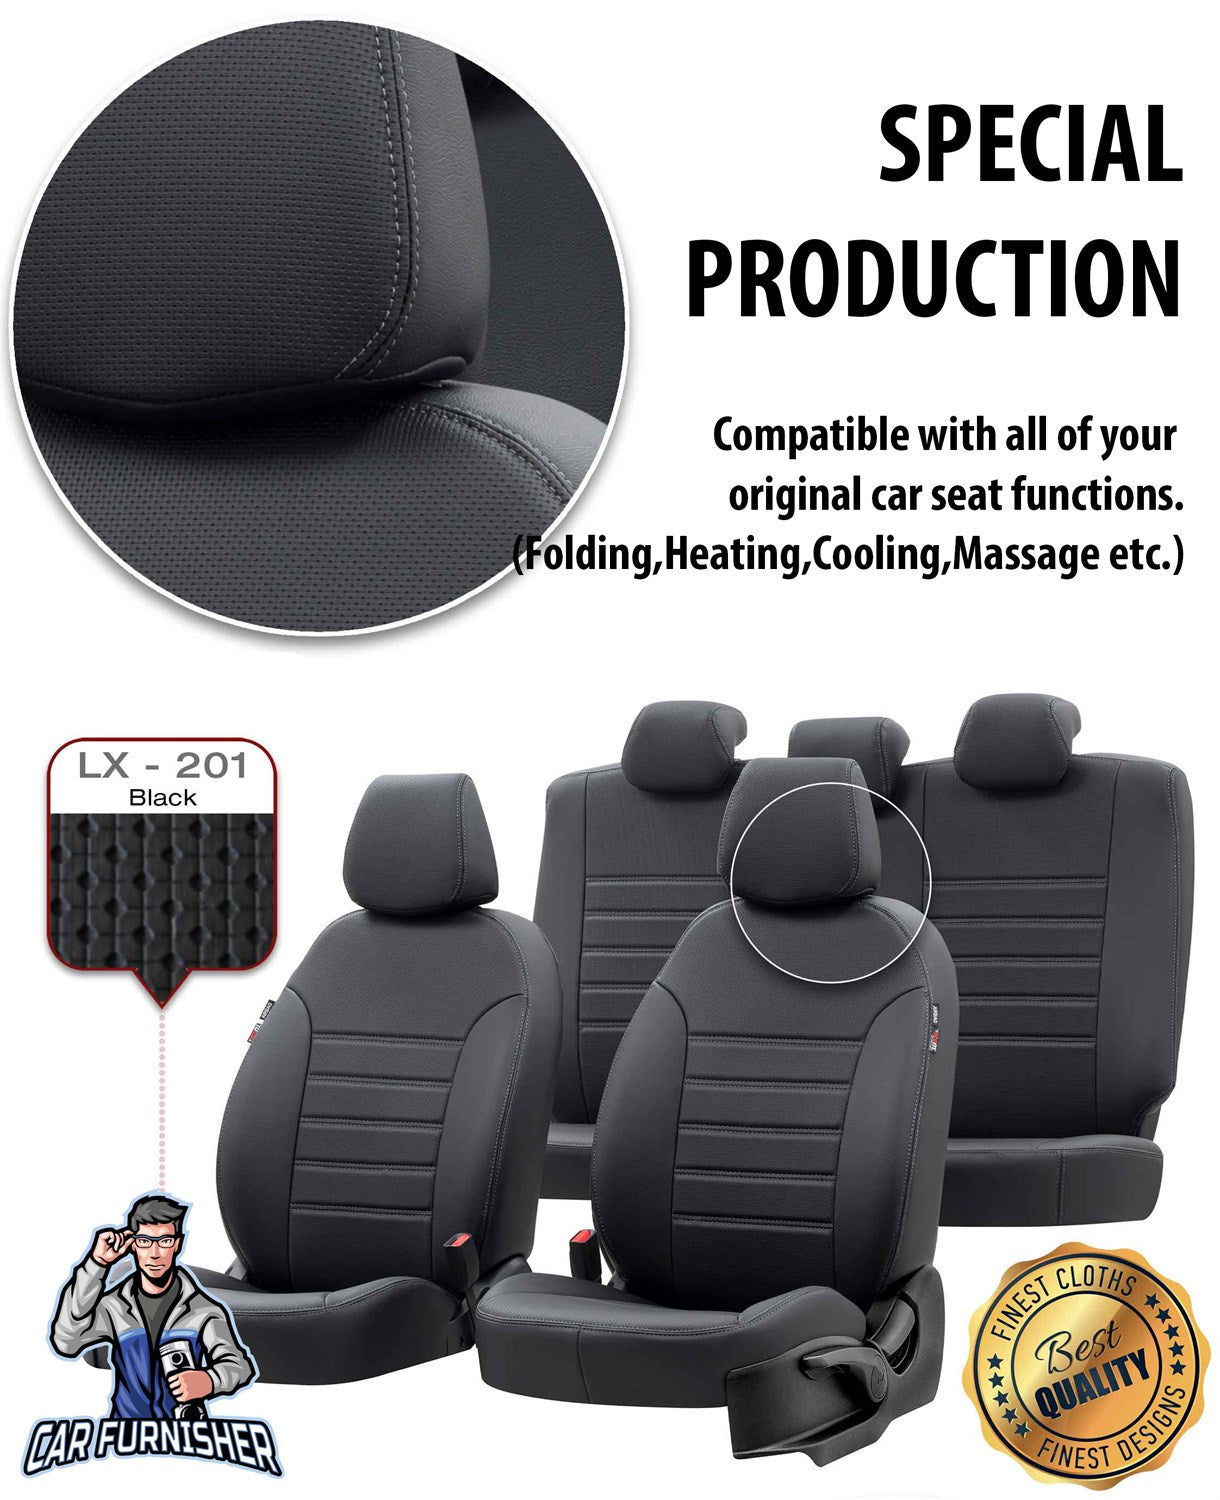 Mercedes C Class Seat Covers New York Leather Design Smoked Leather